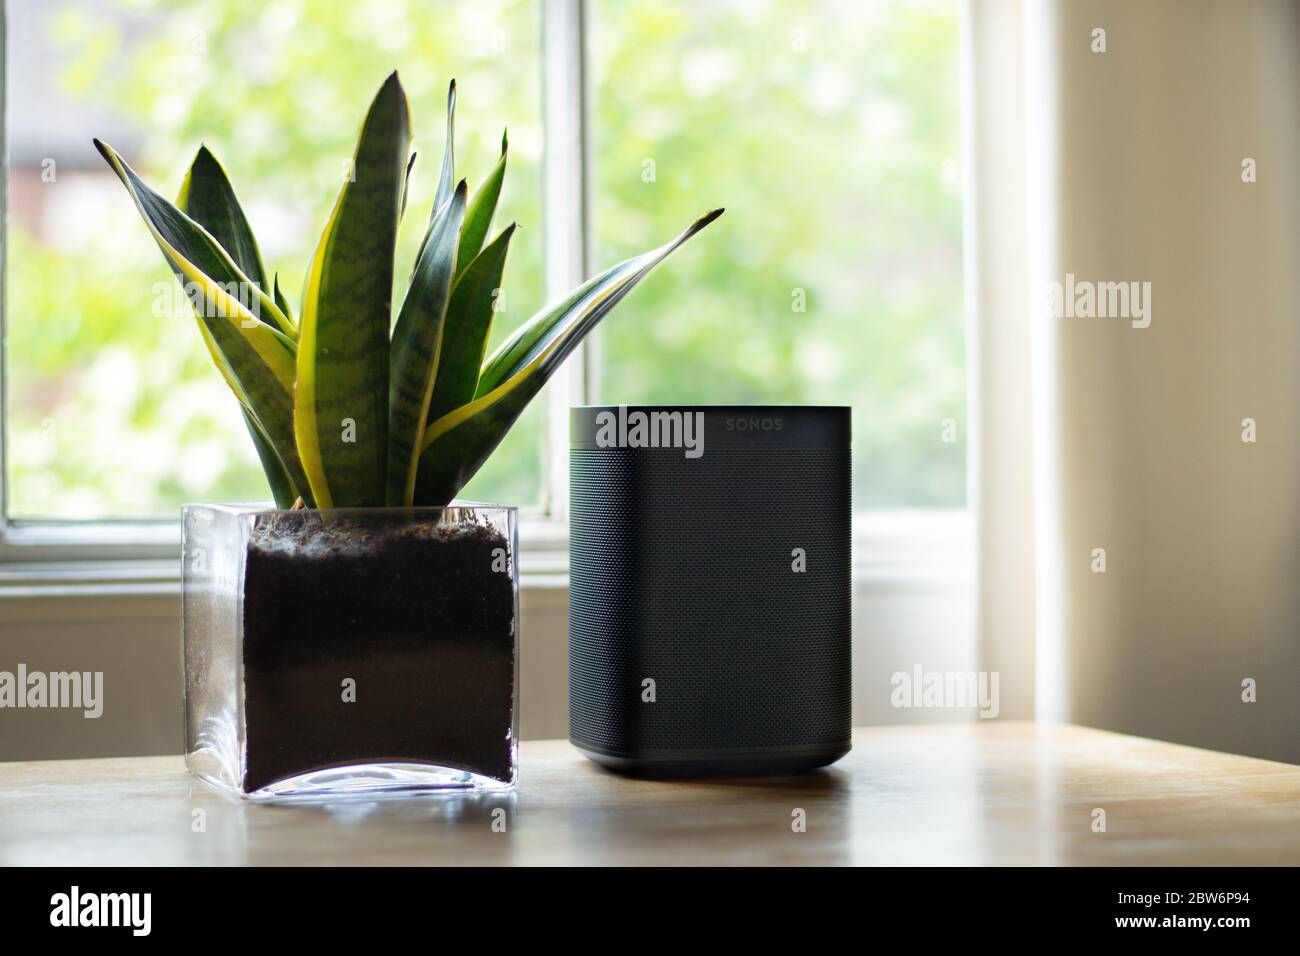 London, United Kingdom - May 09 2020: A Sonos speaker placed next to a plant in a beautiful home. Stock Photo